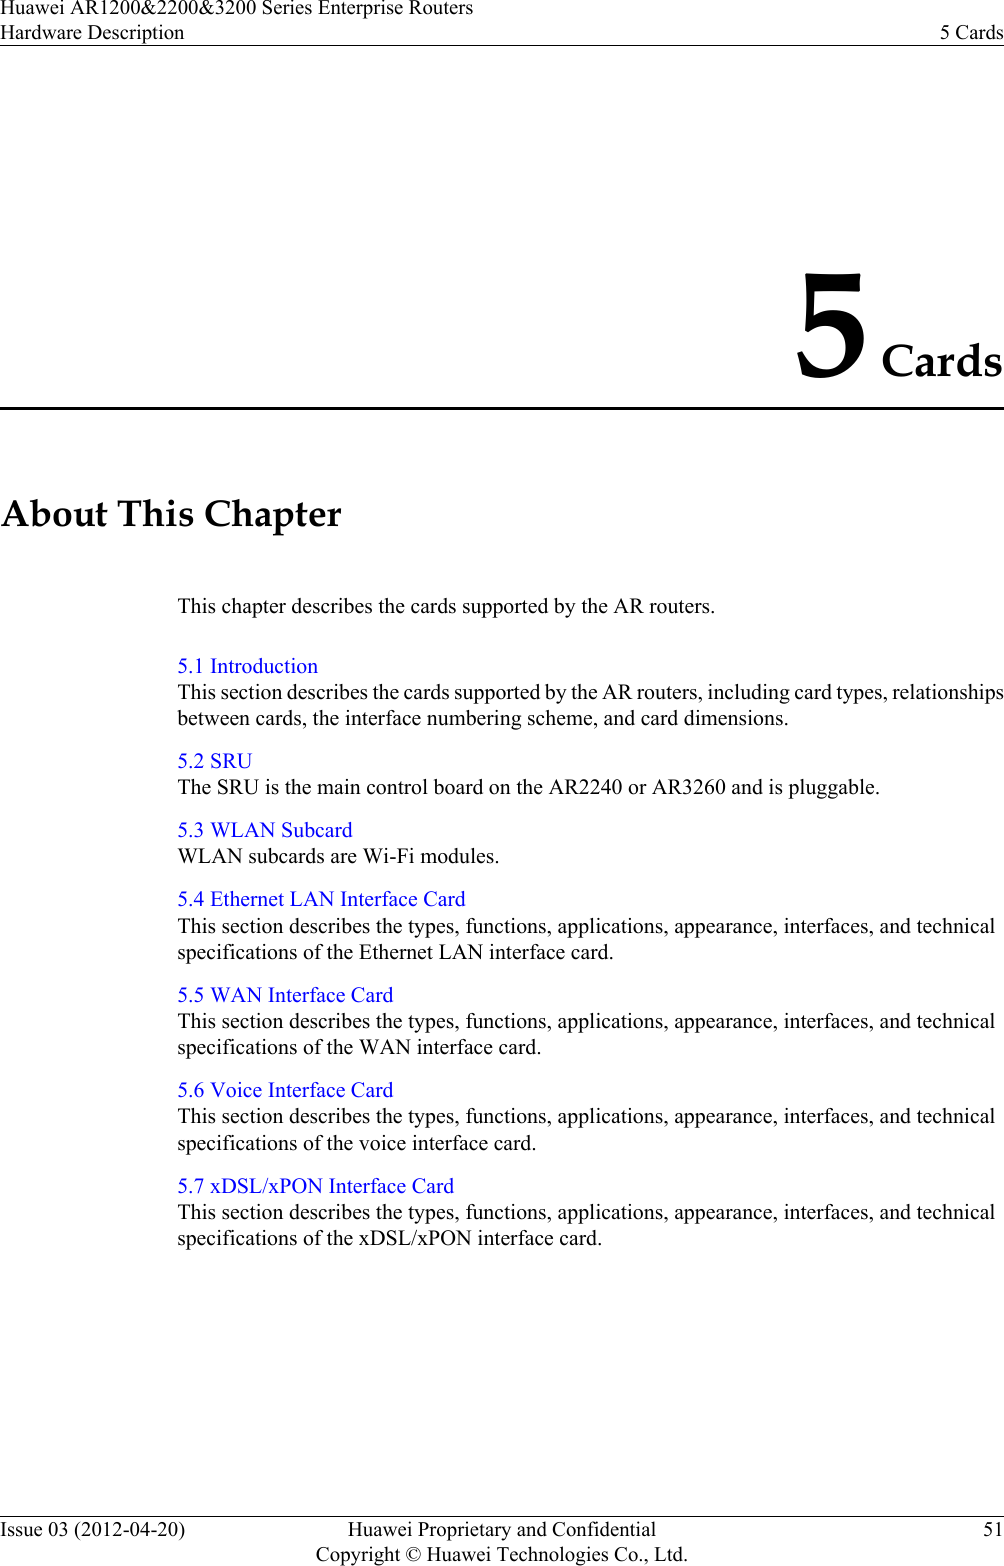 5 CardsAbout This ChapterThis chapter describes the cards supported by the AR routers.5.1 IntroductionThis section describes the cards supported by the AR routers, including card types, relationshipsbetween cards, the interface numbering scheme, and card dimensions.5.2 SRUThe SRU is the main control board on the AR2240 or AR3260 and is pluggable.5.3 WLAN SubcardWLAN subcards are Wi-Fi modules.5.4 Ethernet LAN Interface CardThis section describes the types, functions, applications, appearance, interfaces, and technicalspecifications of the Ethernet LAN interface card.5.5 WAN Interface CardThis section describes the types, functions, applications, appearance, interfaces, and technicalspecifications of the WAN interface card.5.6 Voice Interface CardThis section describes the types, functions, applications, appearance, interfaces, and technicalspecifications of the voice interface card.5.7 xDSL/xPON Interface CardThis section describes the types, functions, applications, appearance, interfaces, and technicalspecifications of the xDSL/xPON interface card.Huawei AR1200&amp;2200&amp;3200 Series Enterprise RoutersHardware Description 5 CardsIssue 03 (2012-04-20) Huawei Proprietary and ConfidentialCopyright © Huawei Technologies Co., Ltd.51